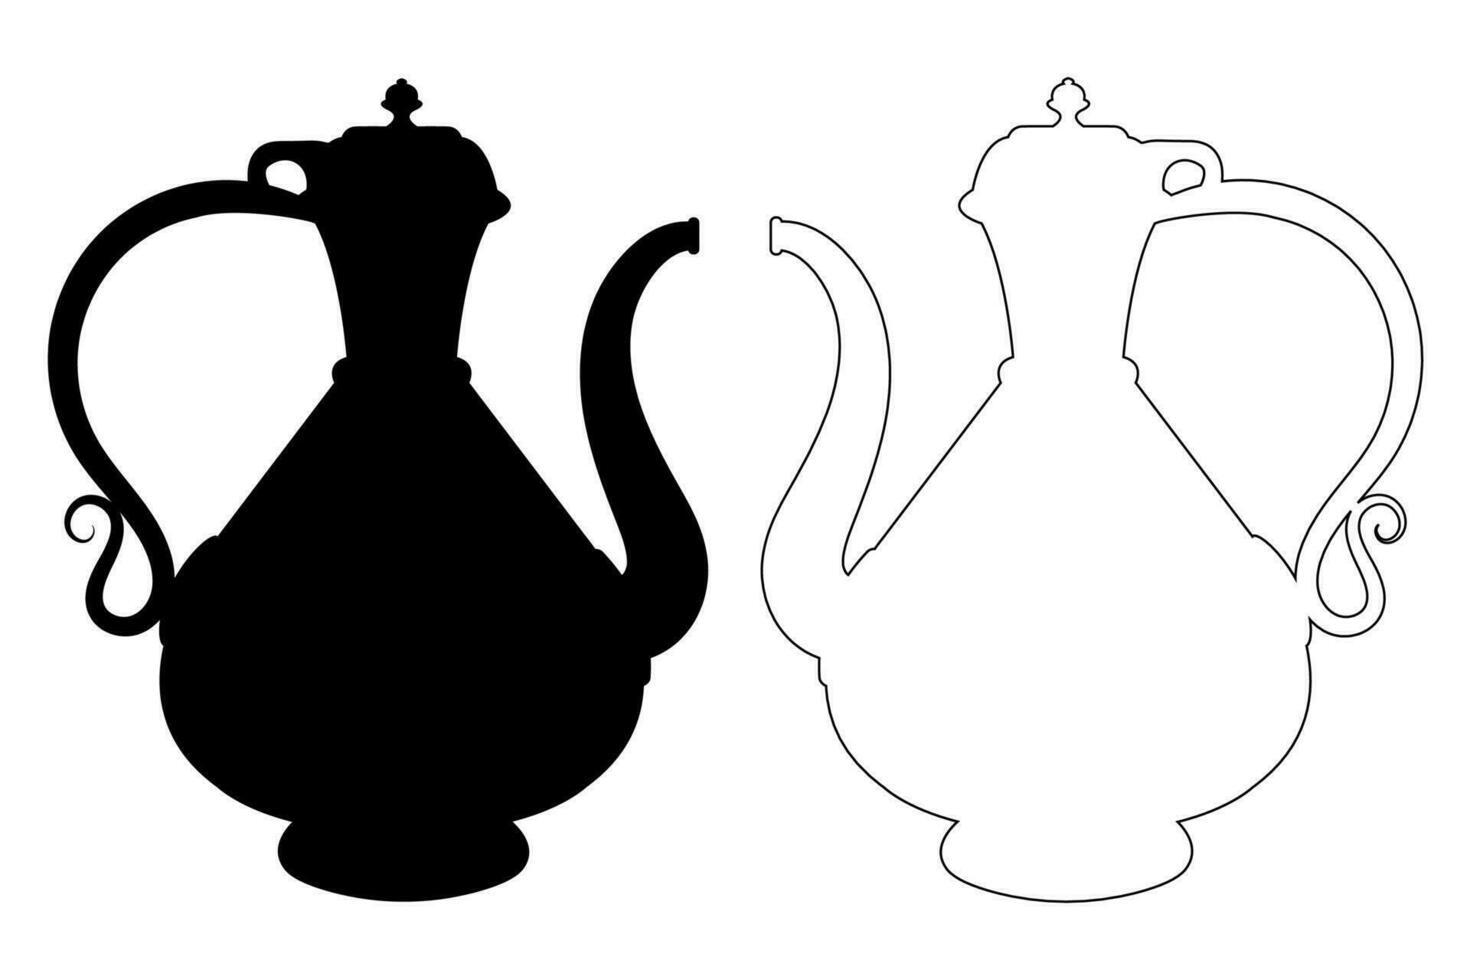 Jugs in a shapes with a silhouette and outline in black color. Decor vintage element vector